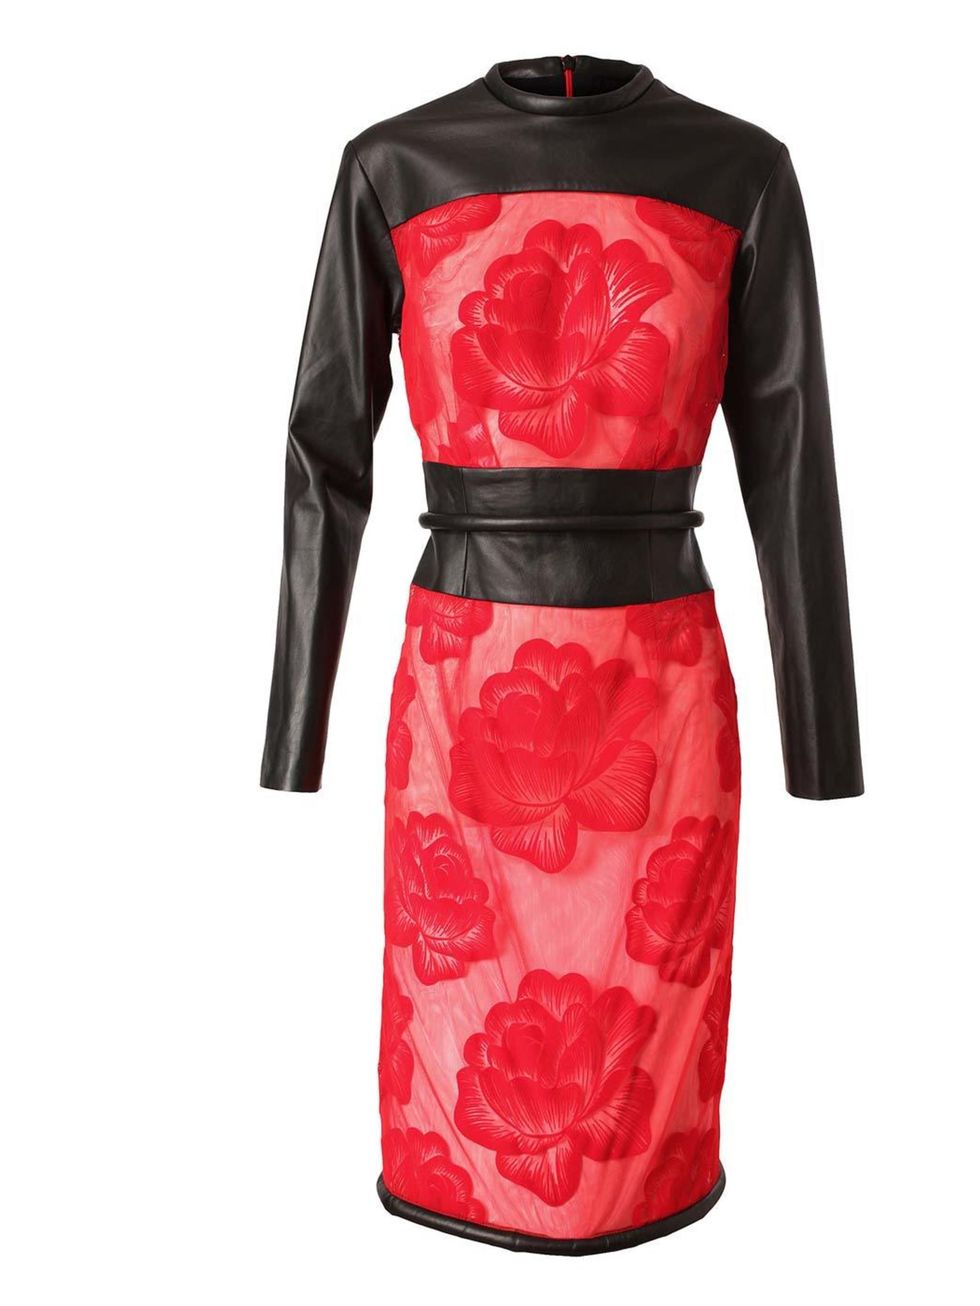 <p>Christopher Kane Leather and Mesh Floral dress £2.200 at <a href="http://www.brownsfashion.com/Product/Women/Clothing/Dresses/Leather_and_Mesh_Floral_Dress/product.aspx?p=4483810&amp;cl=4&amp;pc=1949762">Browns</a></p>